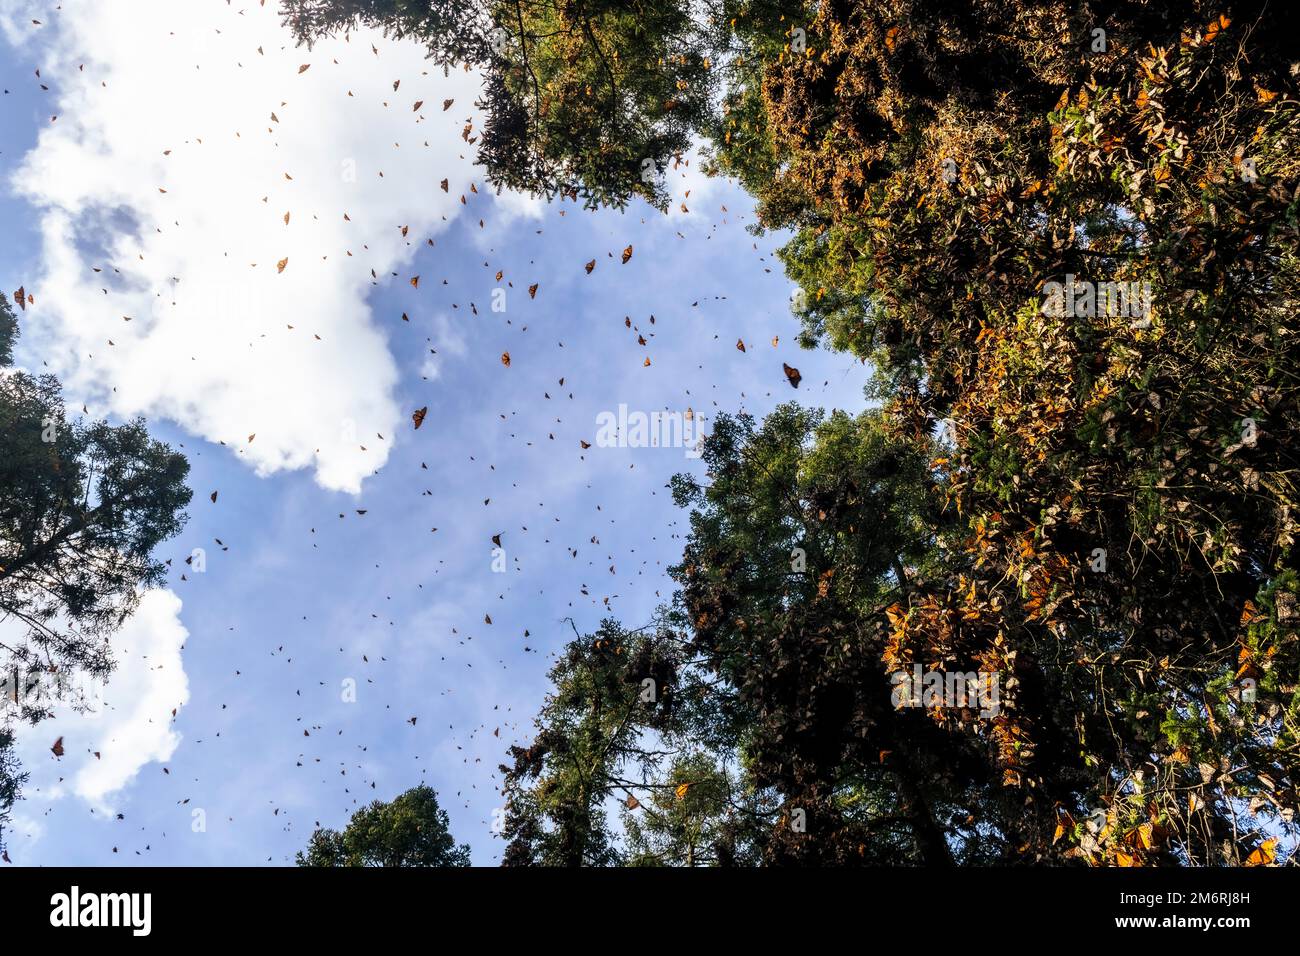 Millions of Butterflies covering trees in the Unesco site Monarch Butterfly Biosphere Reserve, El Rosario, Michoacan, Mexico Stock Photo